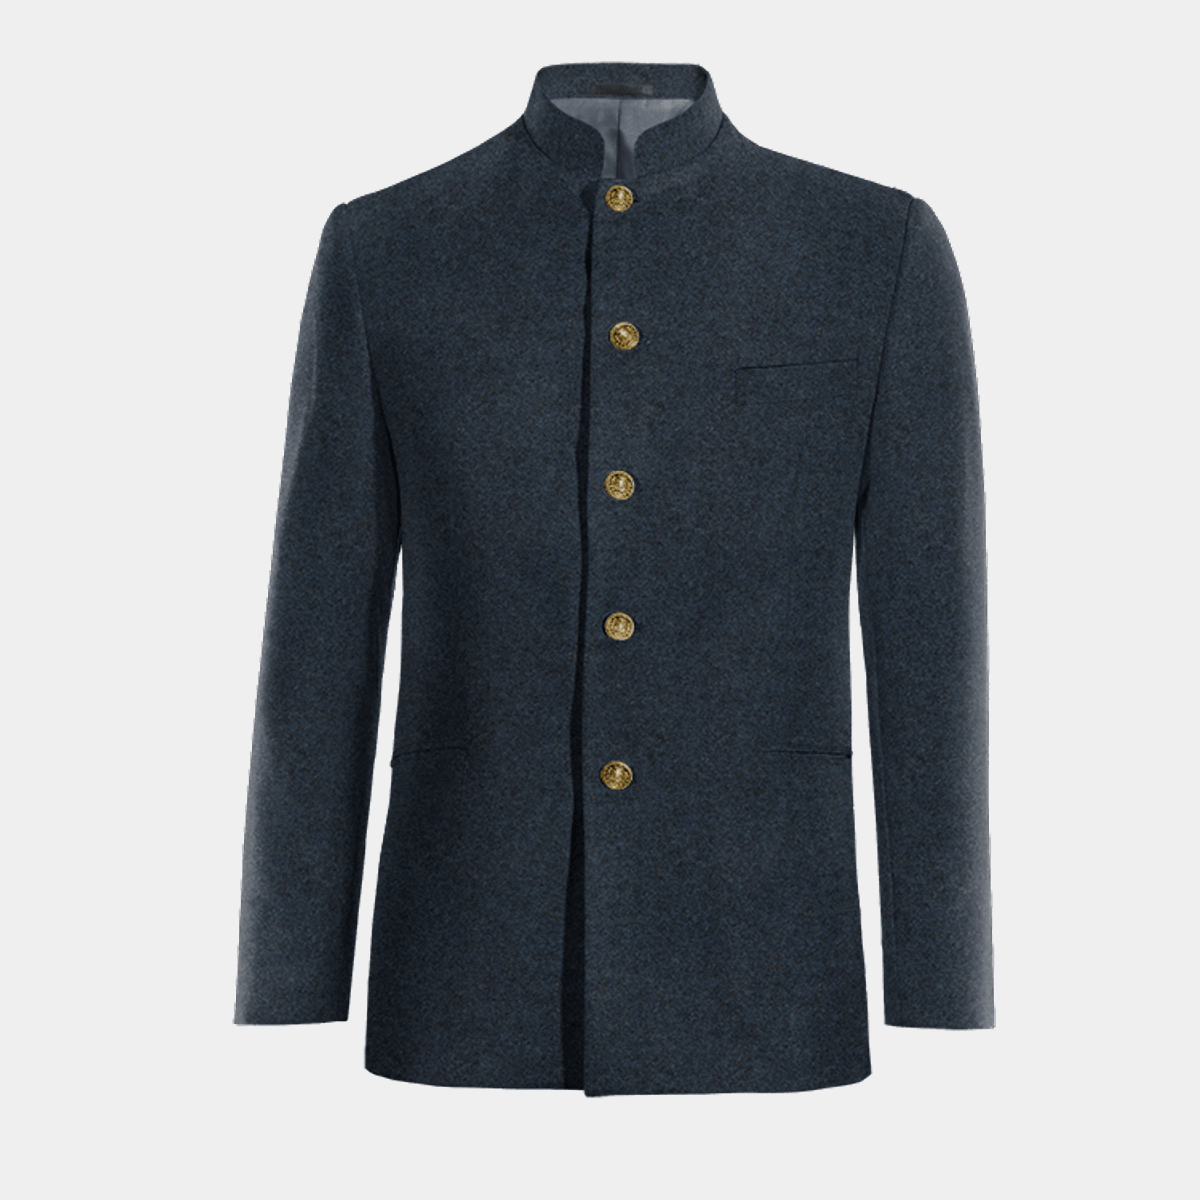 Navy Blue Tweed chinese collar Blazer with brass buttons $227 | Hockerty